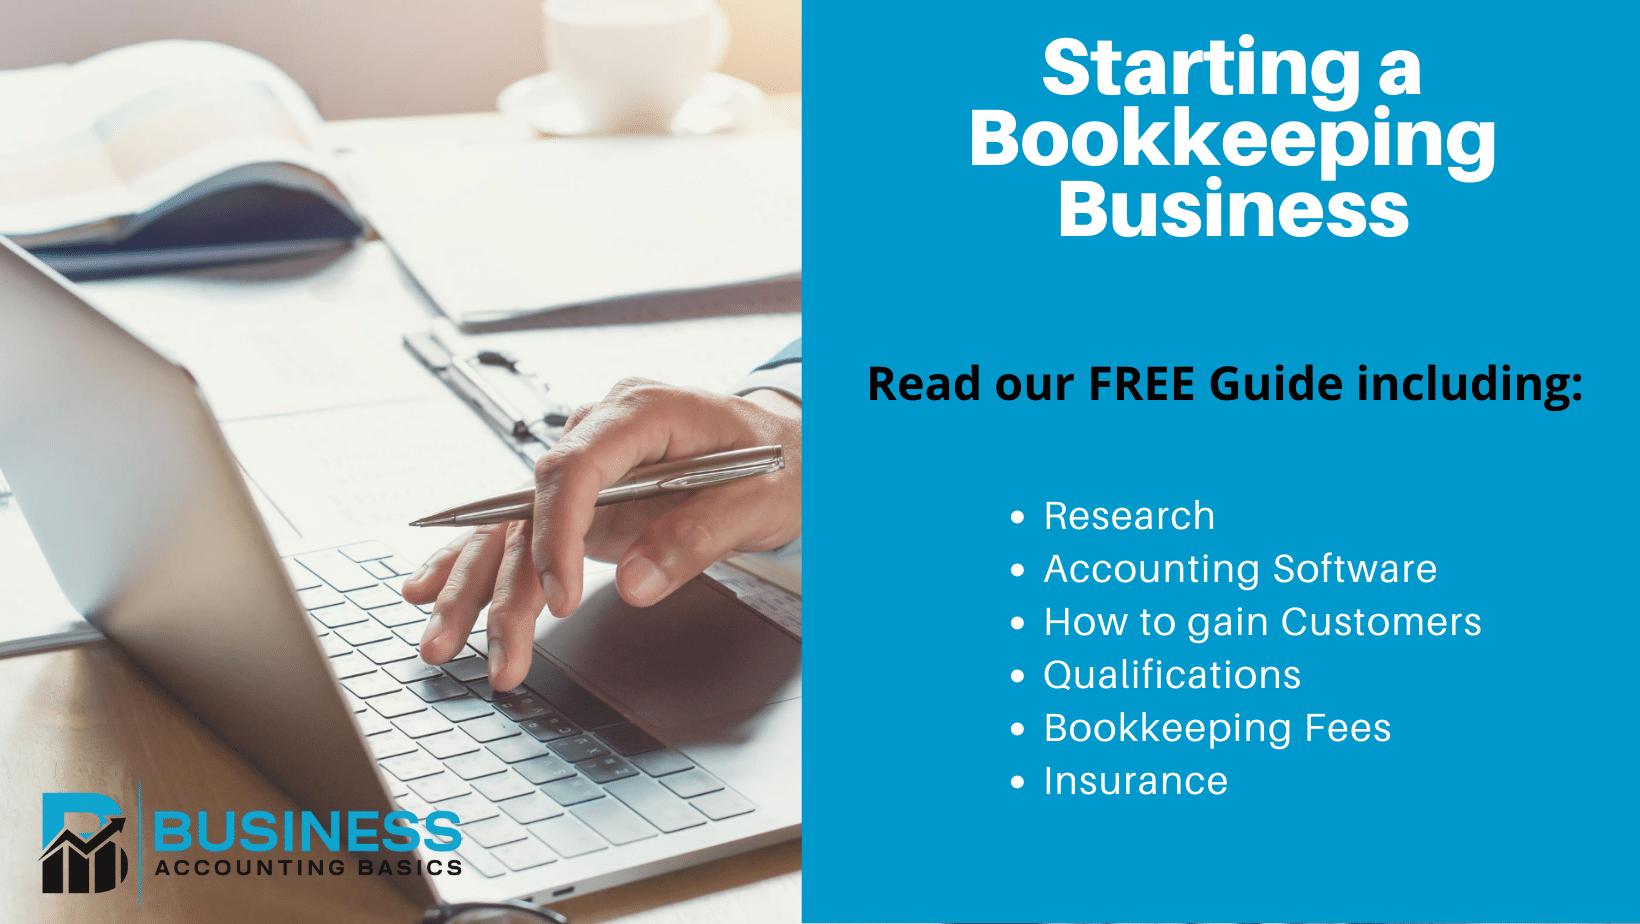 Start A Bookkeeping Business: Attracting Clients for Your Bookkeeping Business